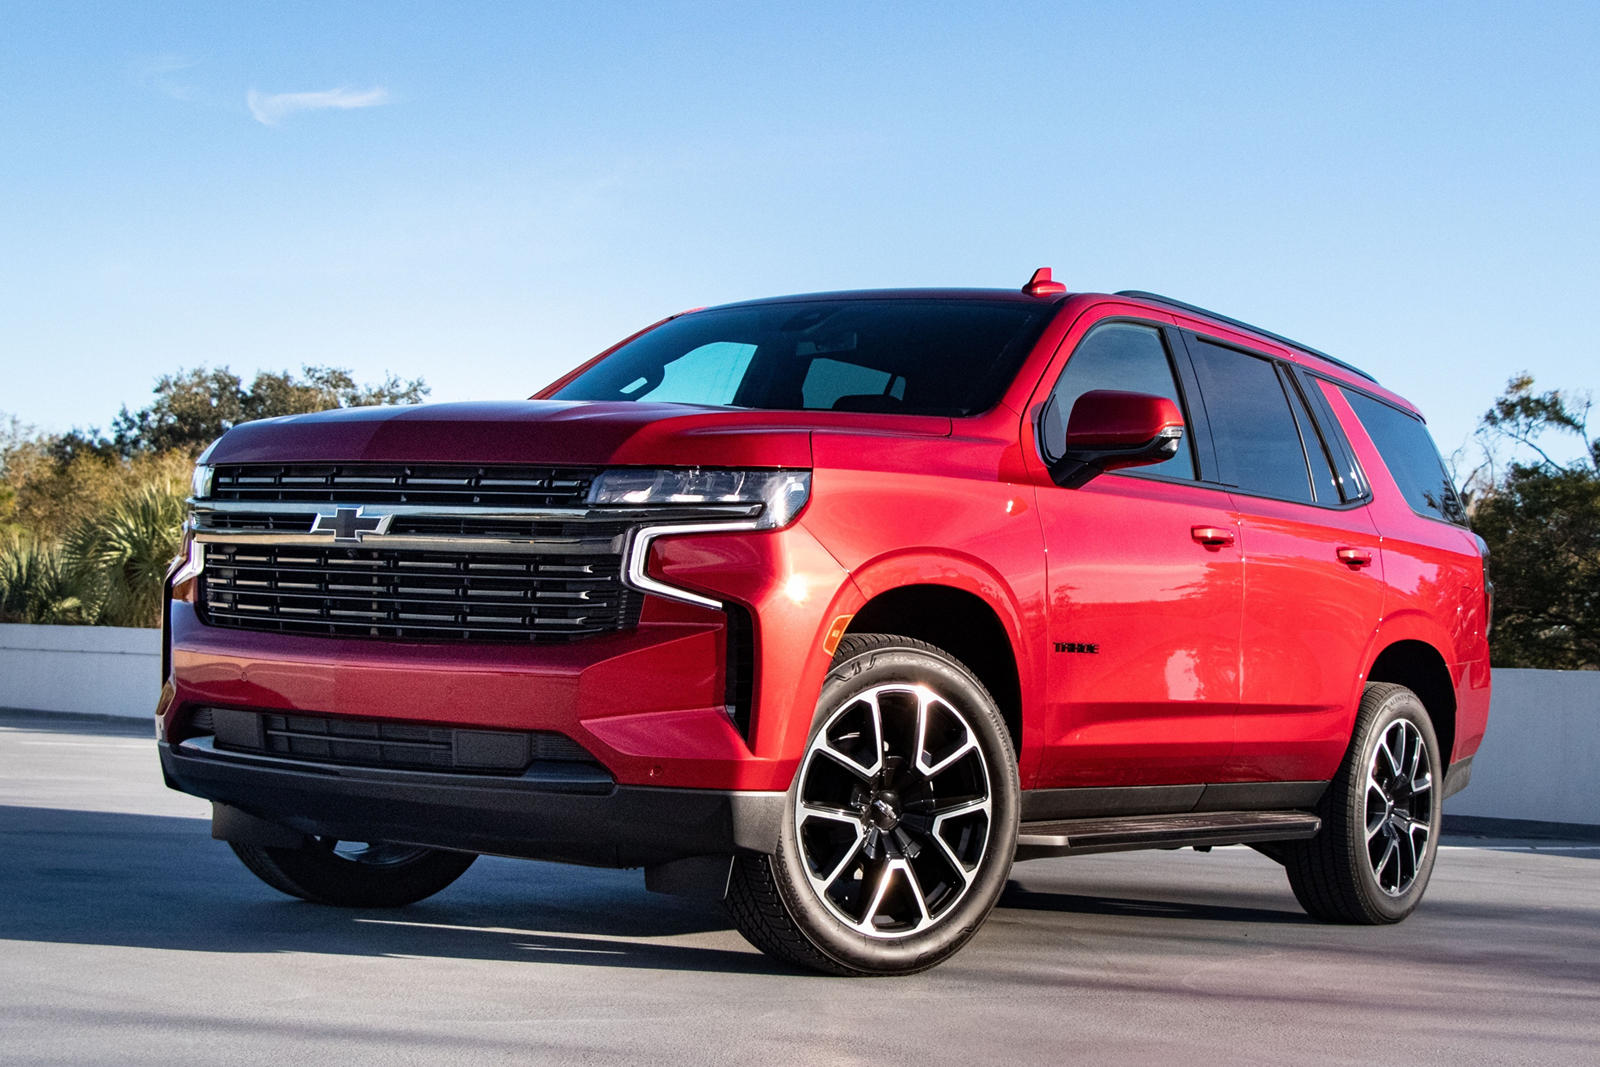 2021 Chevrolet Tahoe New Chevy Tahoe SUV Models Reviews, Price